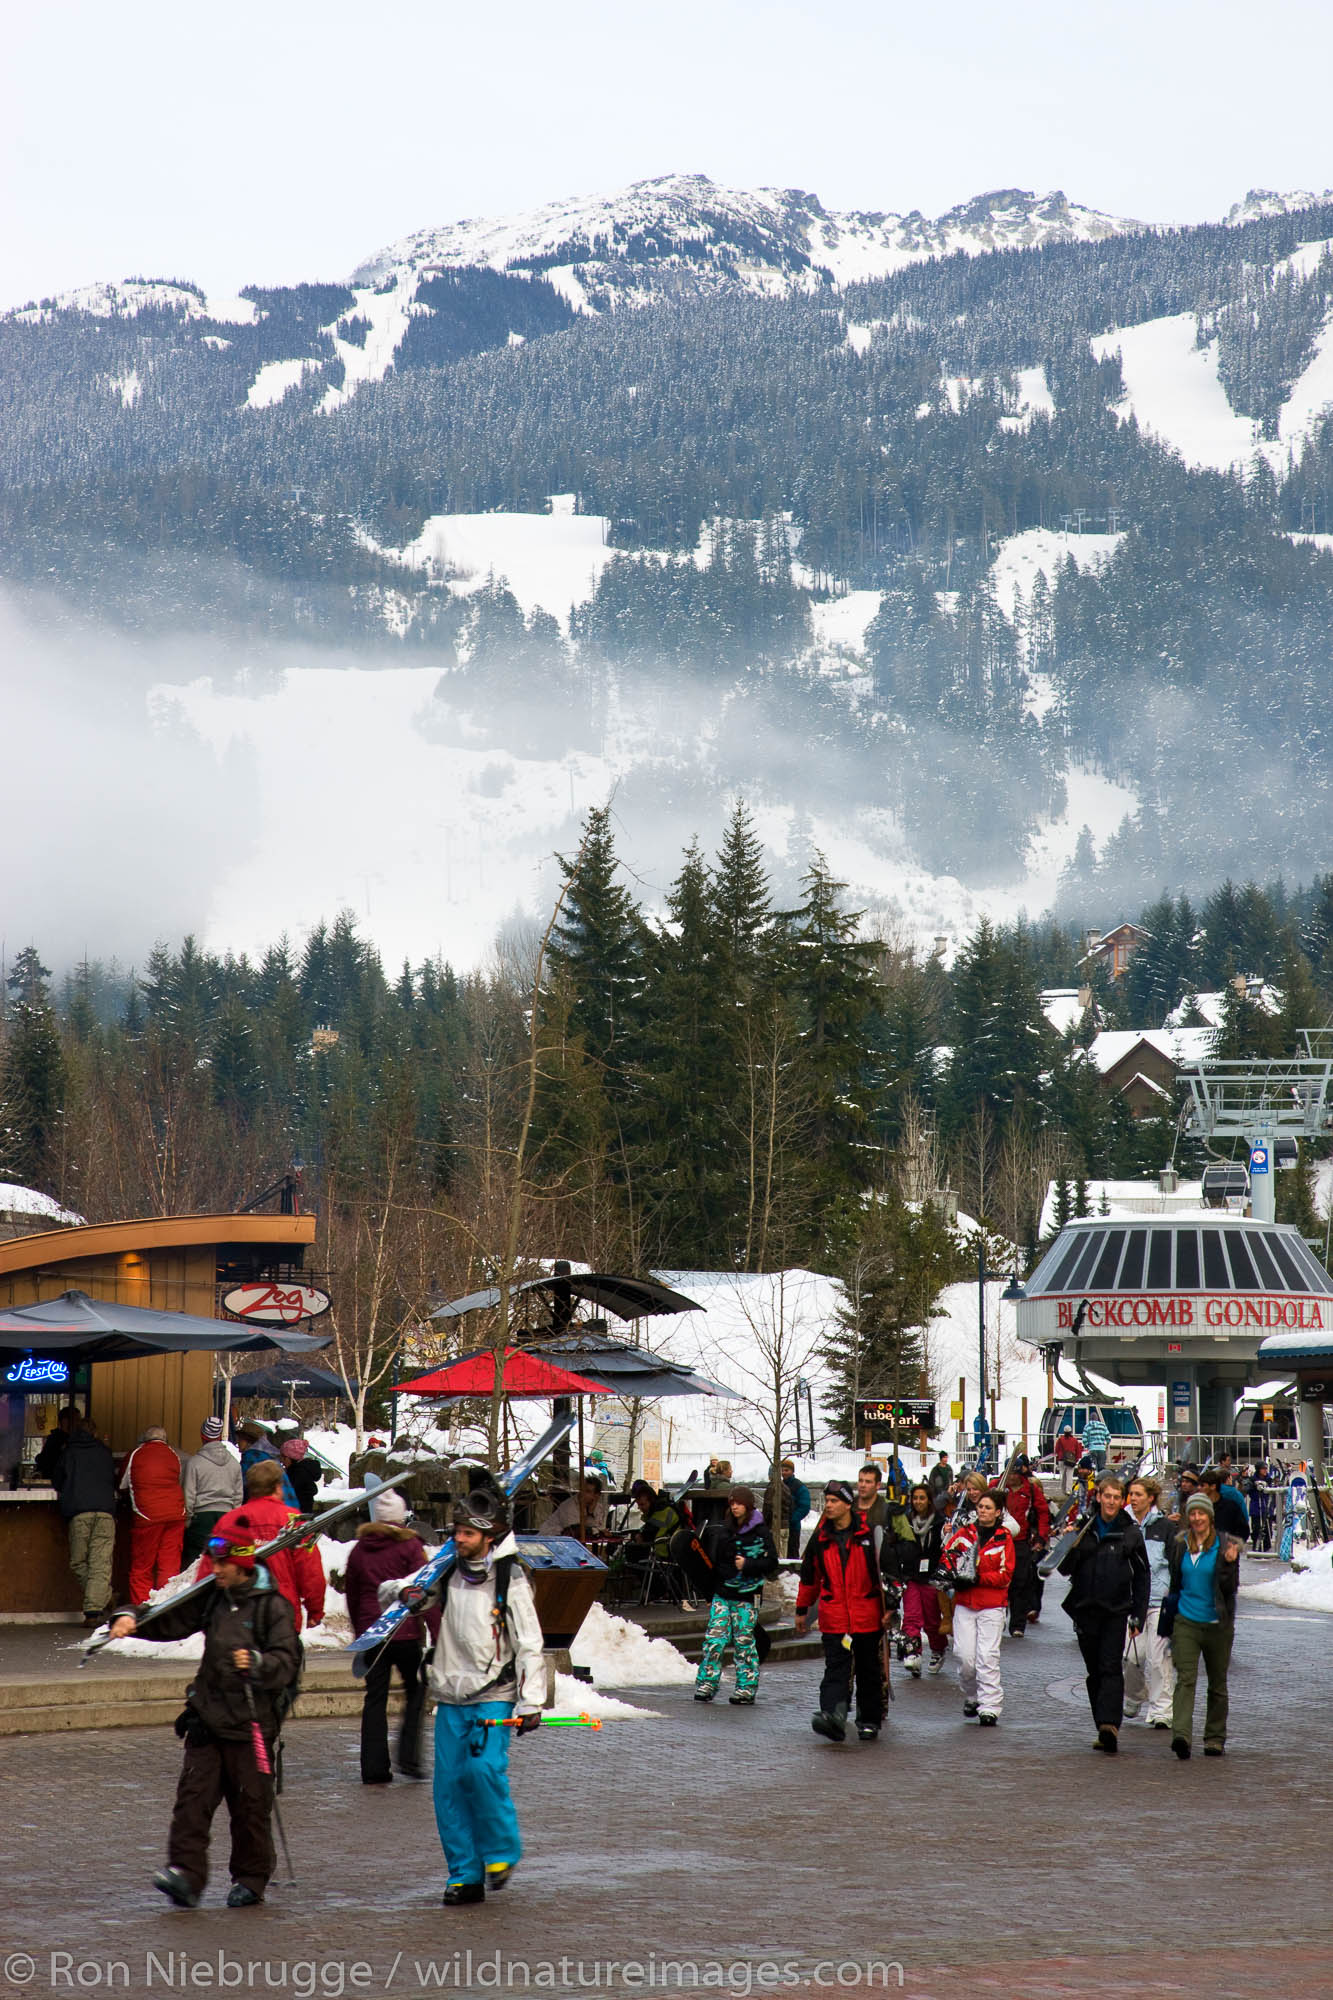 Whistler Village, host of the 2010 Vancouver Winter Olympics, Whistler, British Columbia, Canada.